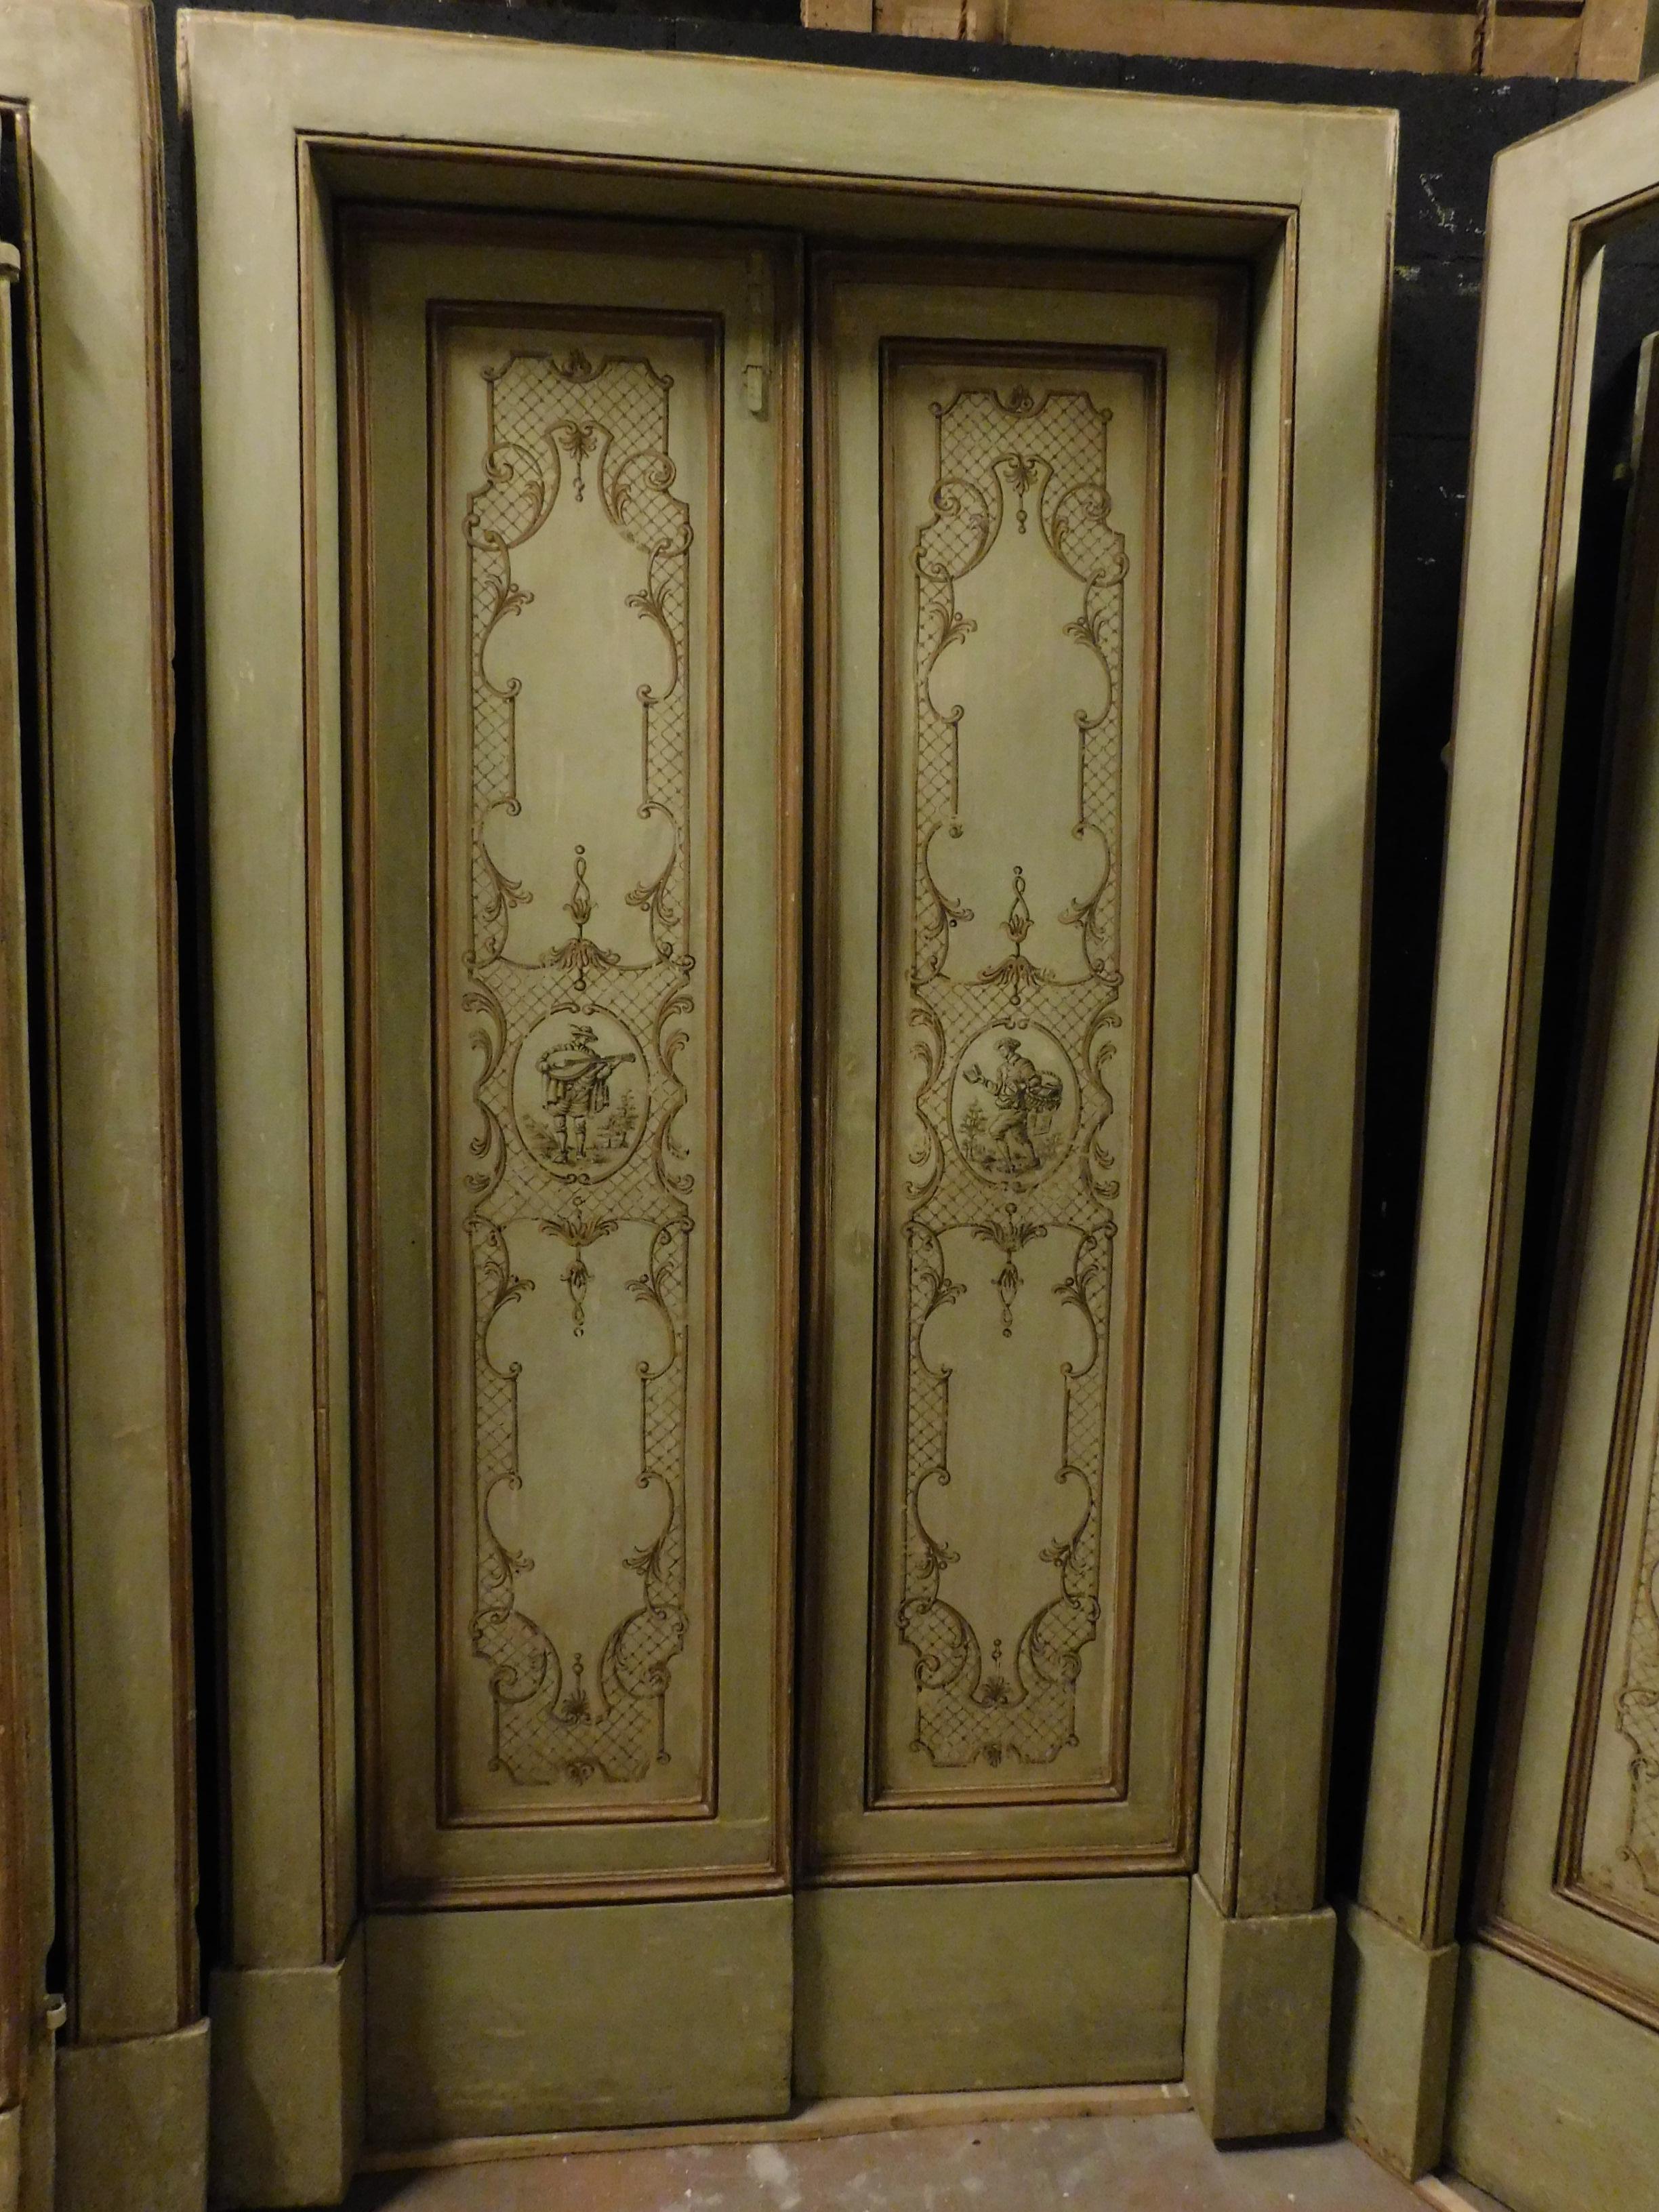 Set of 3 Antique Painted Double Doors with Original Frame, 18th Century Italy For Sale 5